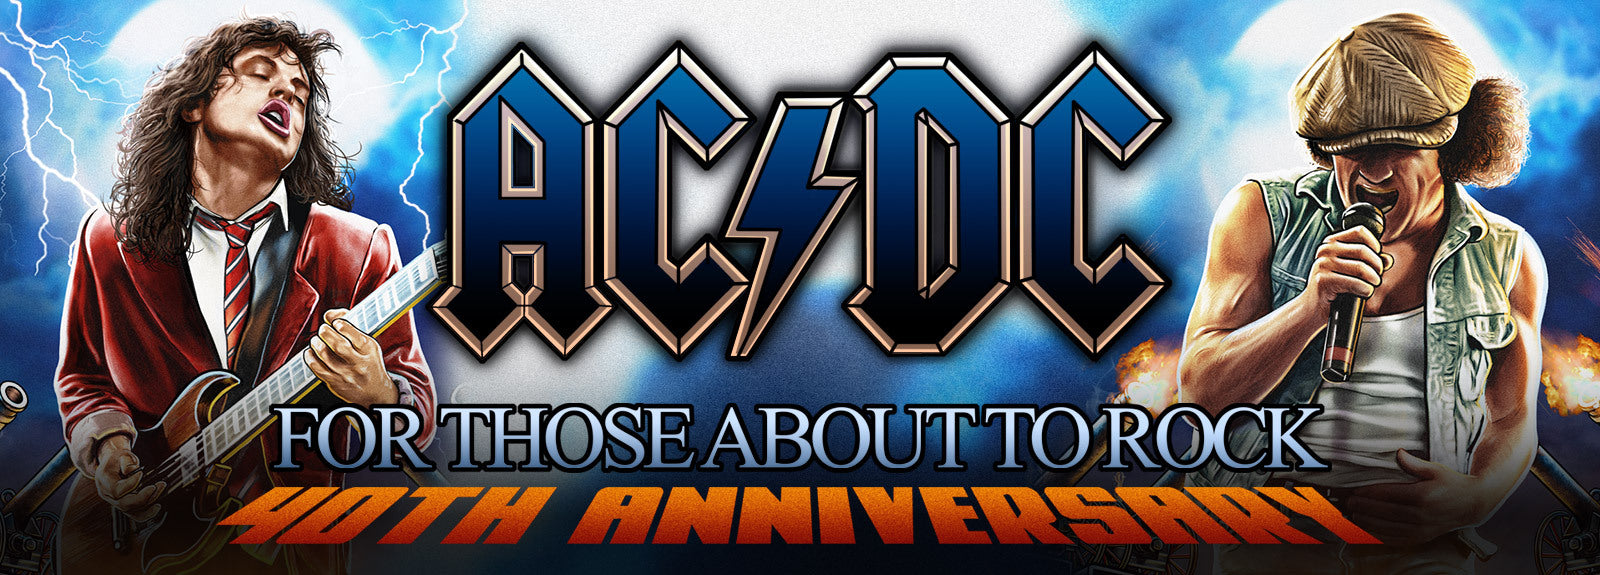 AC/DC For Those About To Rock 40th Anniversary